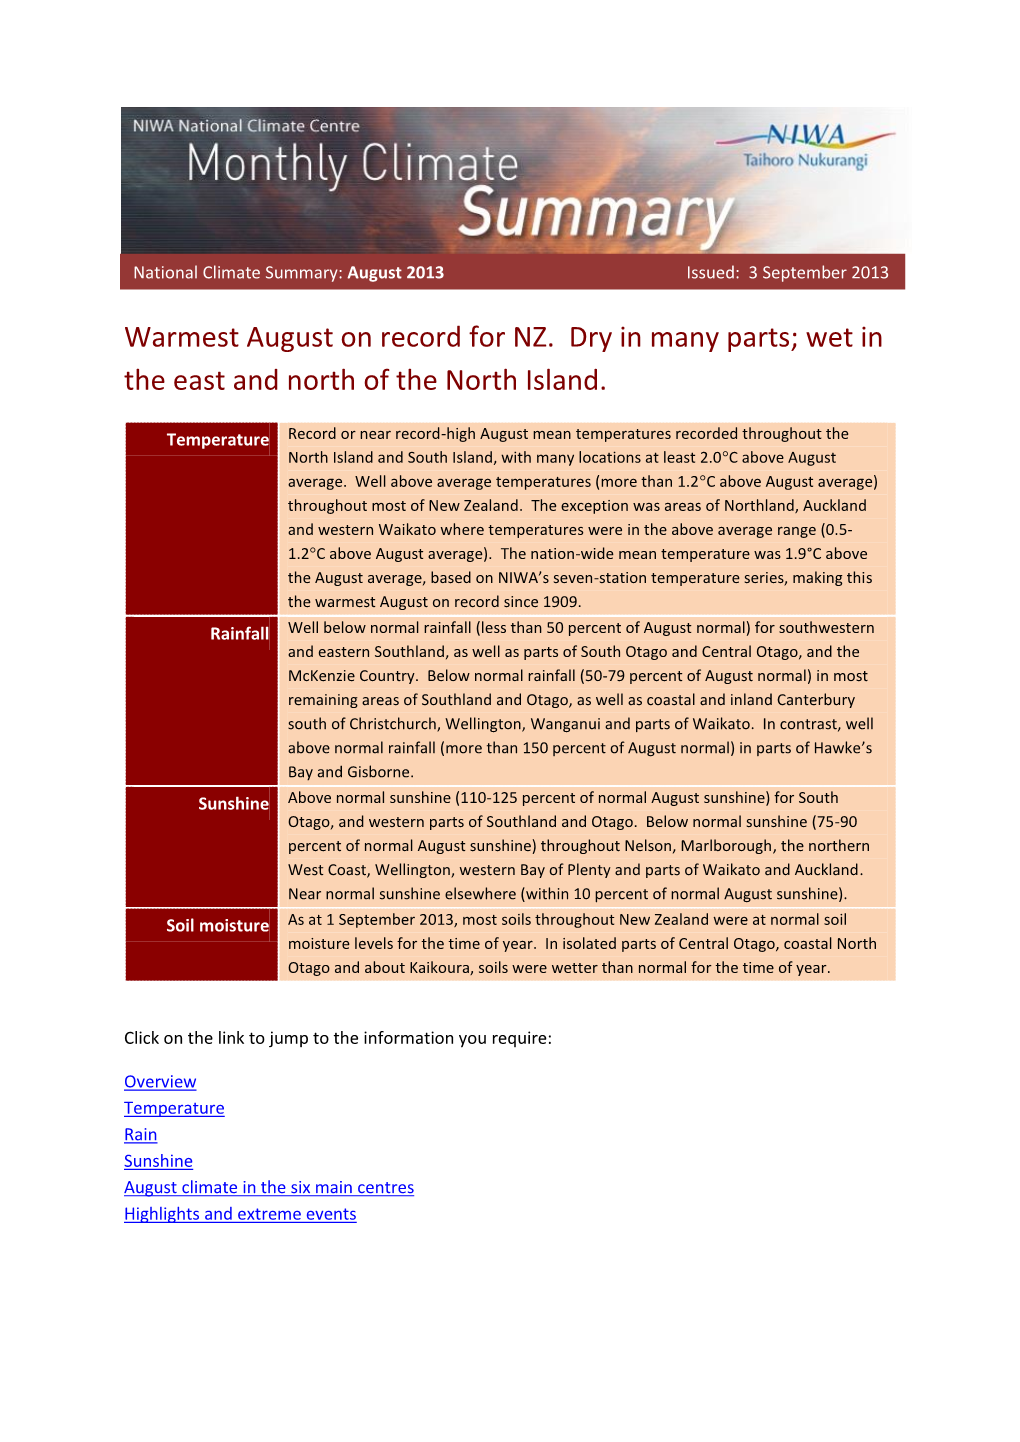 Full Details of the August 2013 Climate Summary